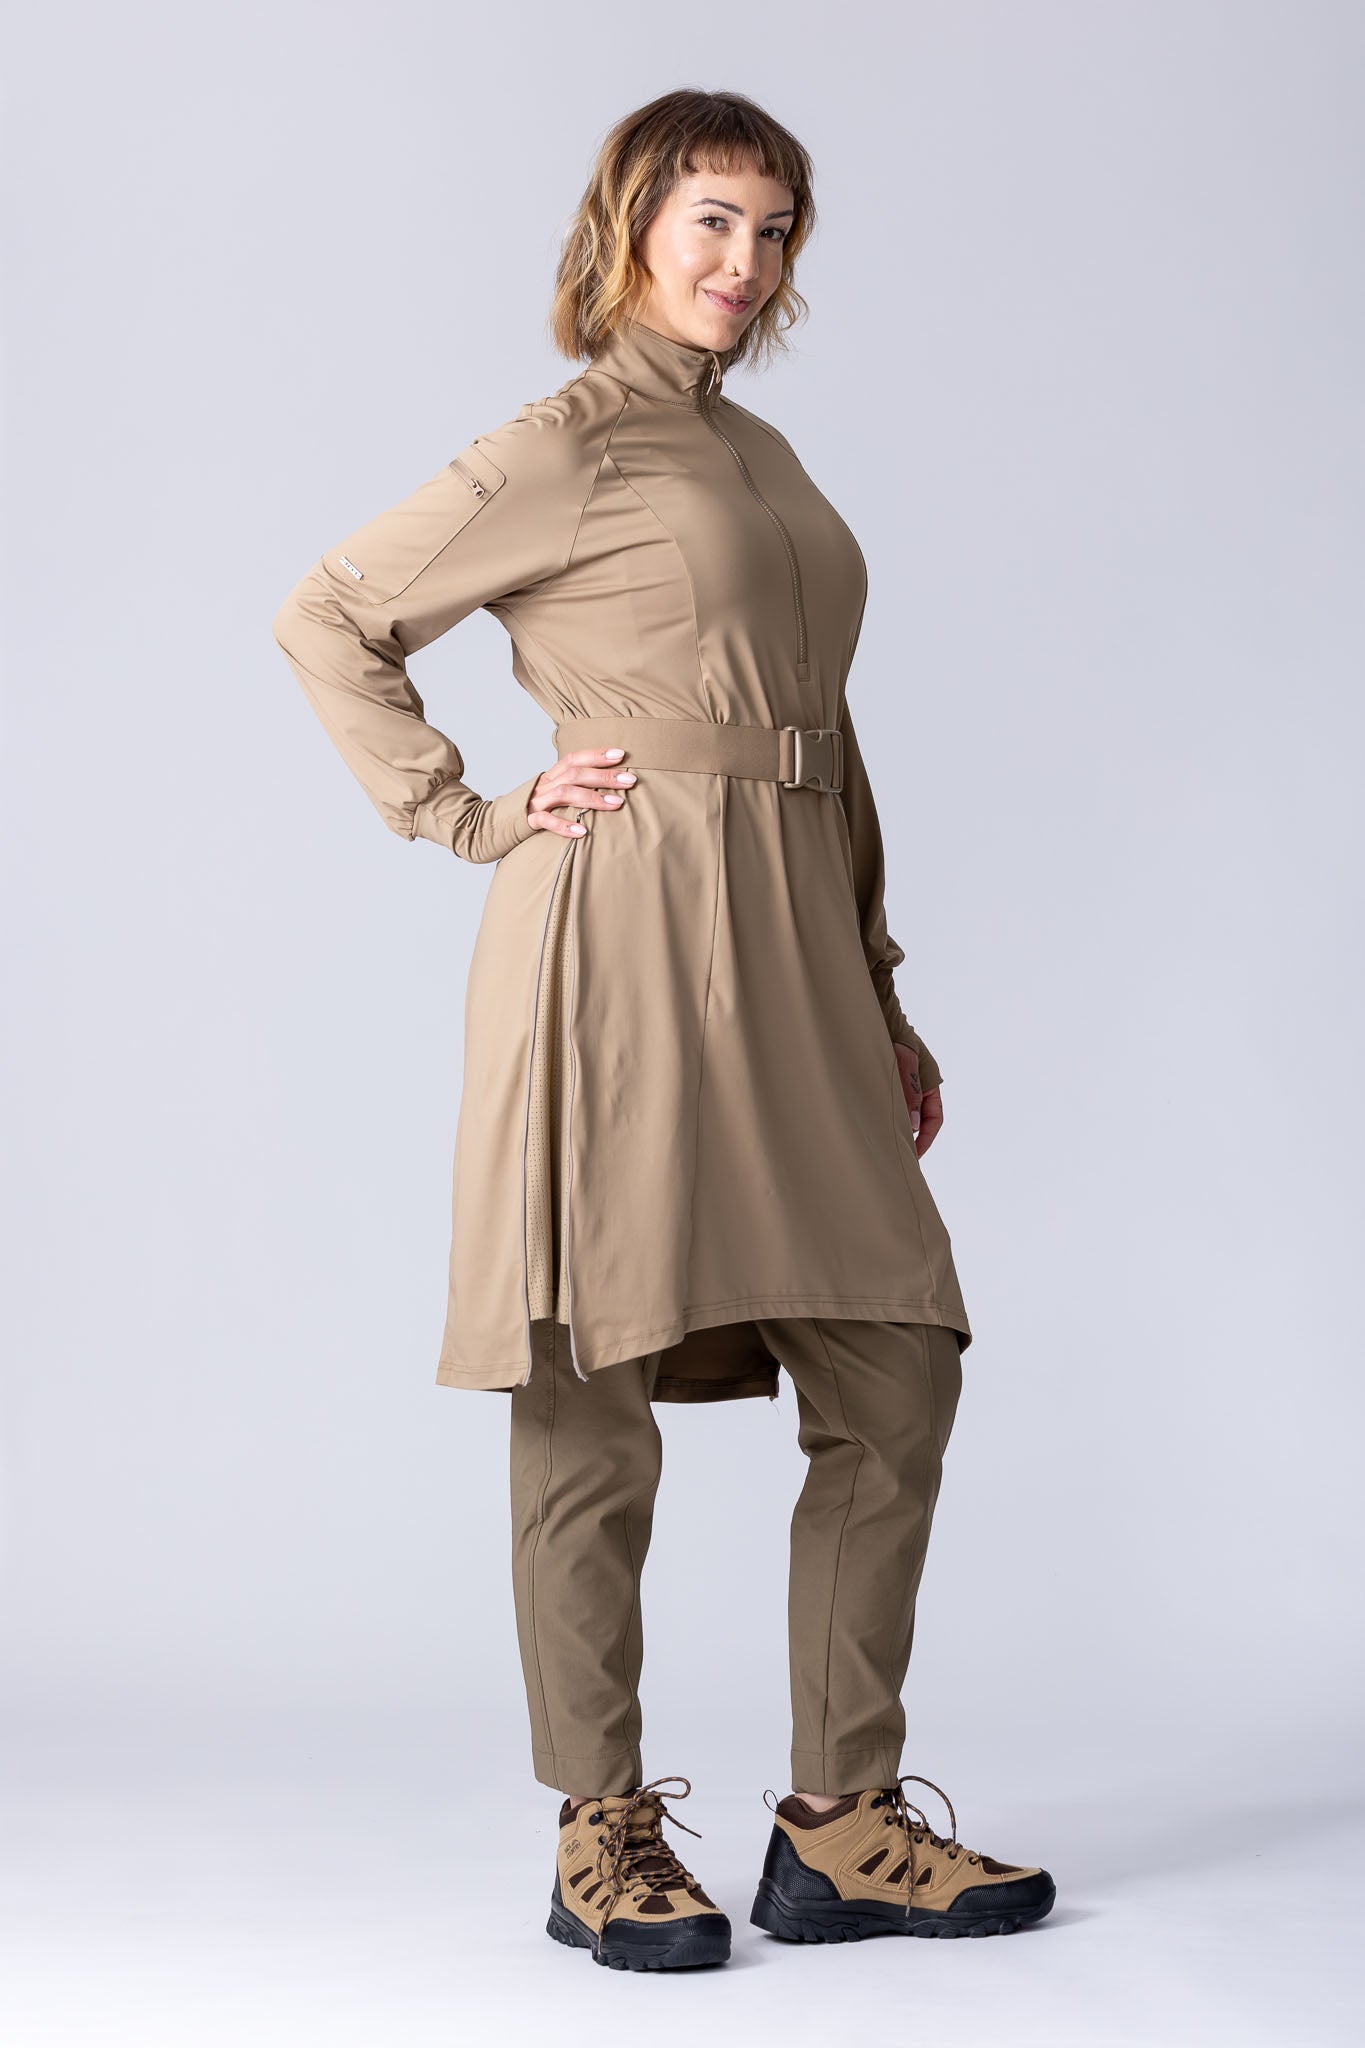 Long line tunic top in beige. With front zipper, hidden side panels, back breathability panel and waist belt with buckle.